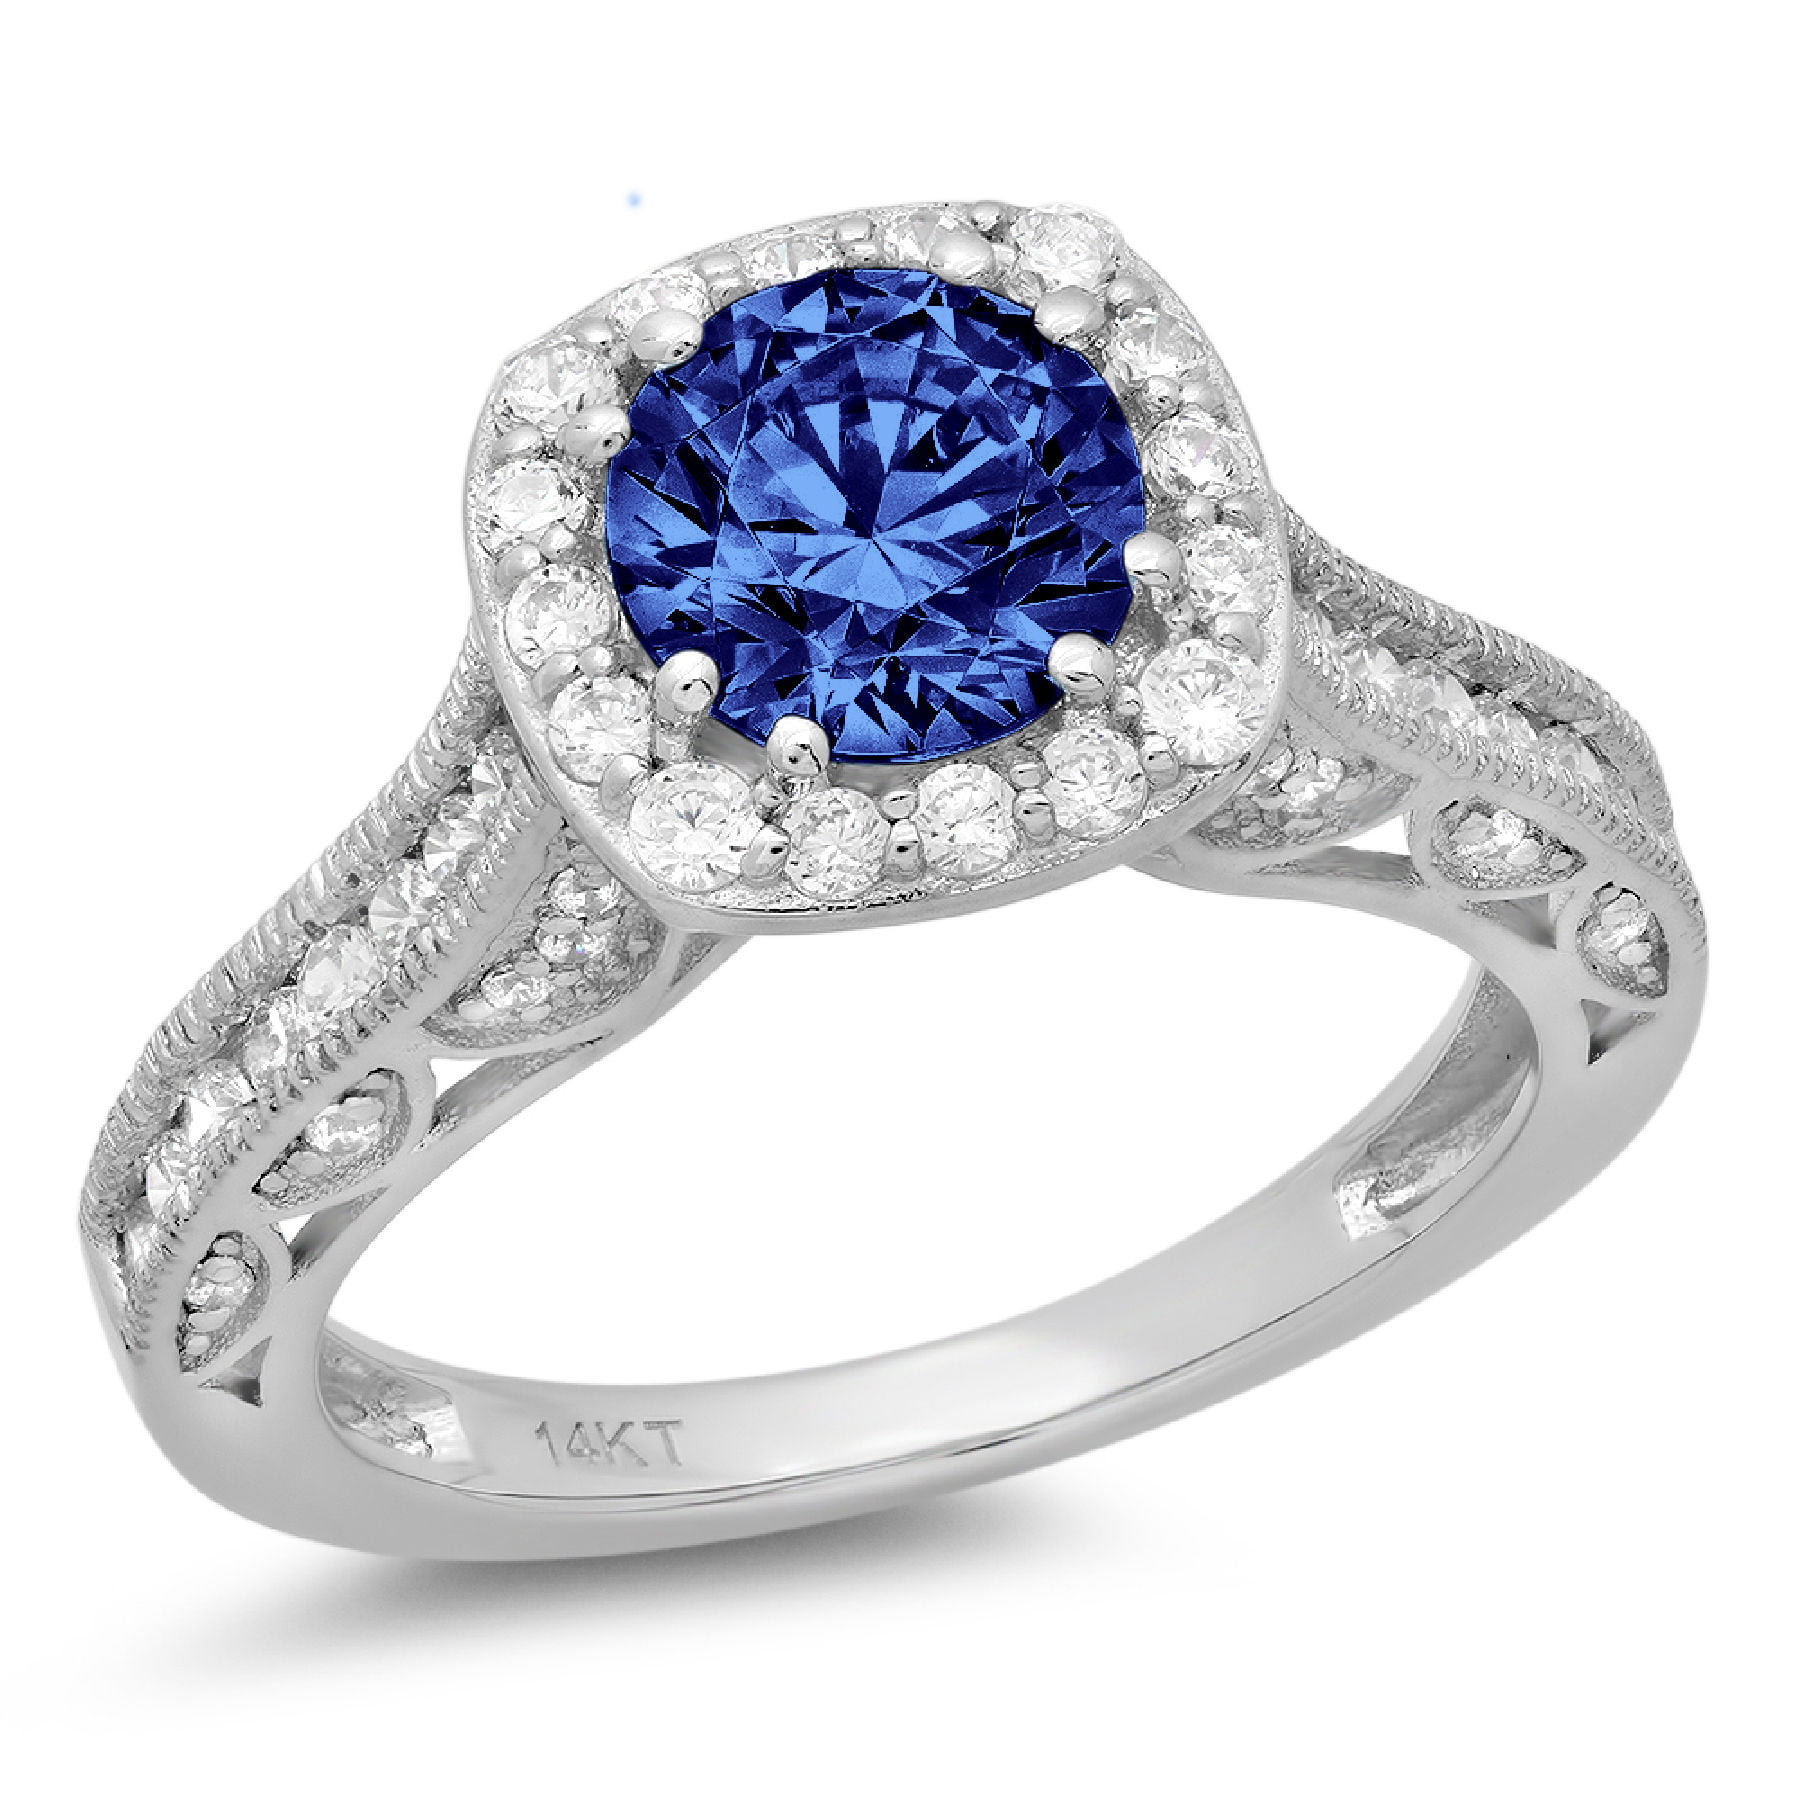 2.25 ct  Round Cut Designer Genuine Flawless VVS1 Blue Simulated Diamond 14K 18K White Gold Solitaire with Accents Ring